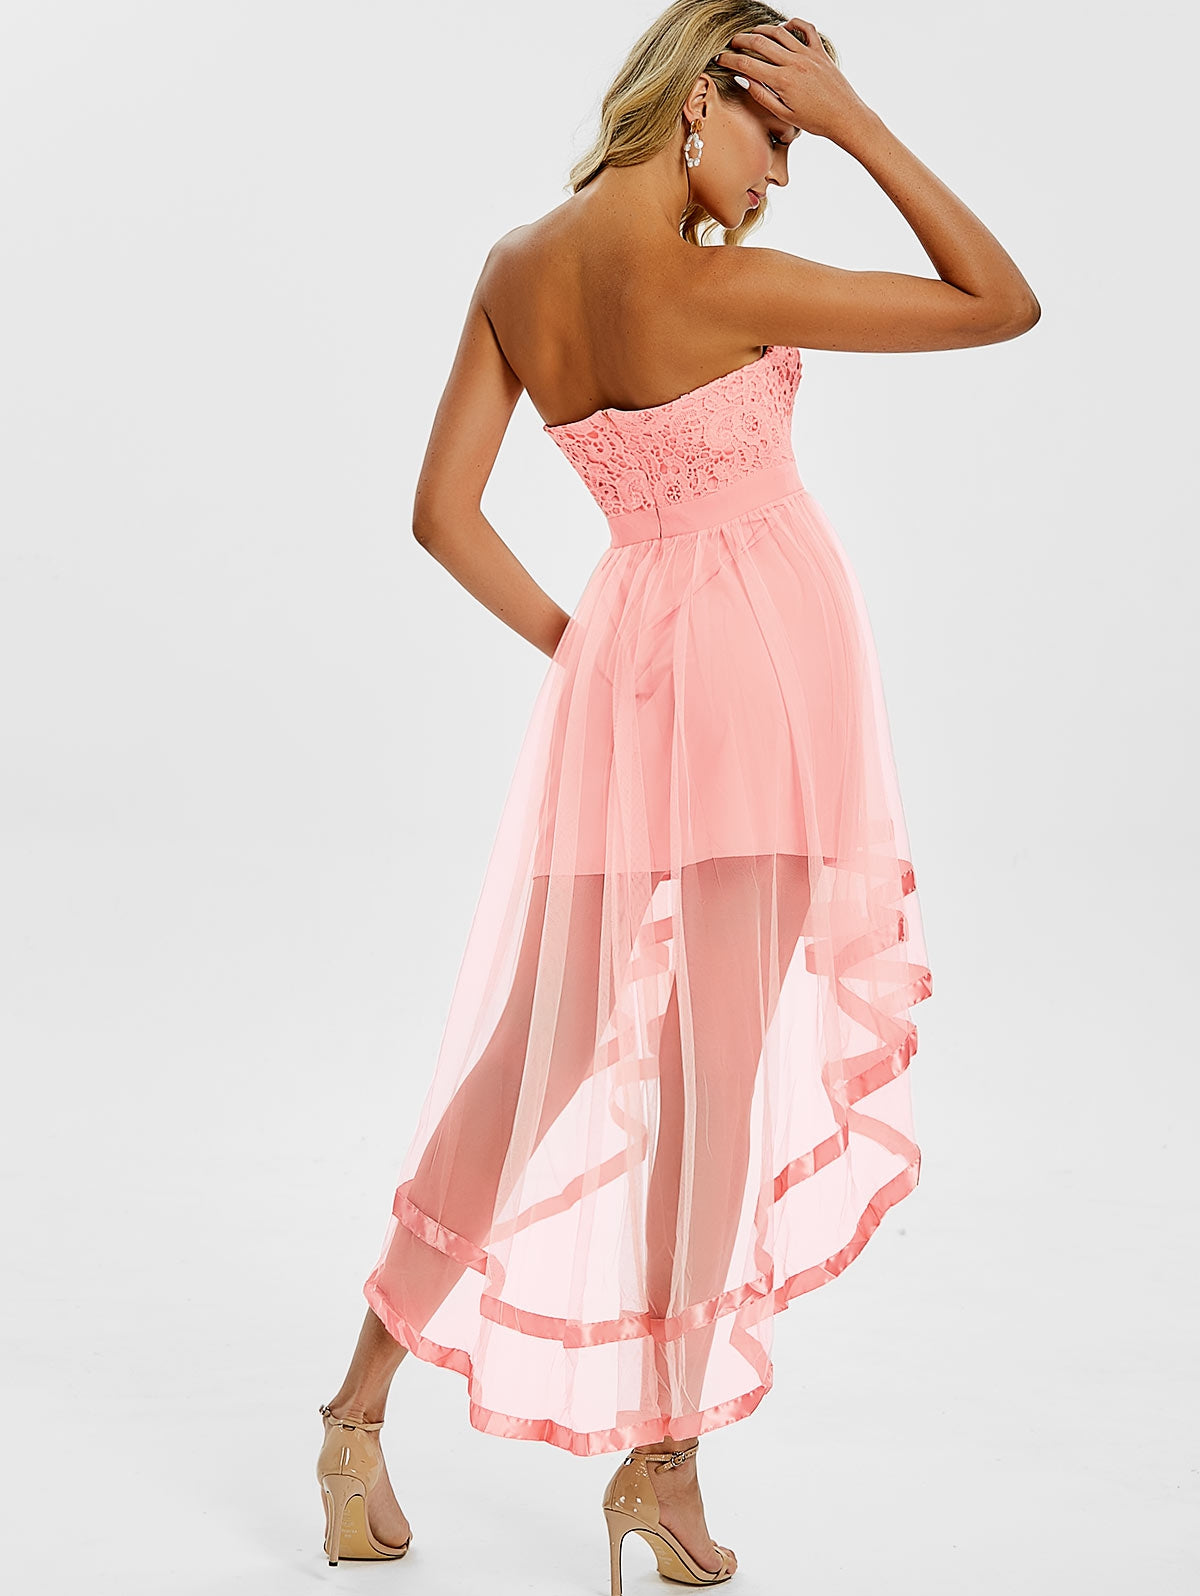 Strapless High Low Party Dress